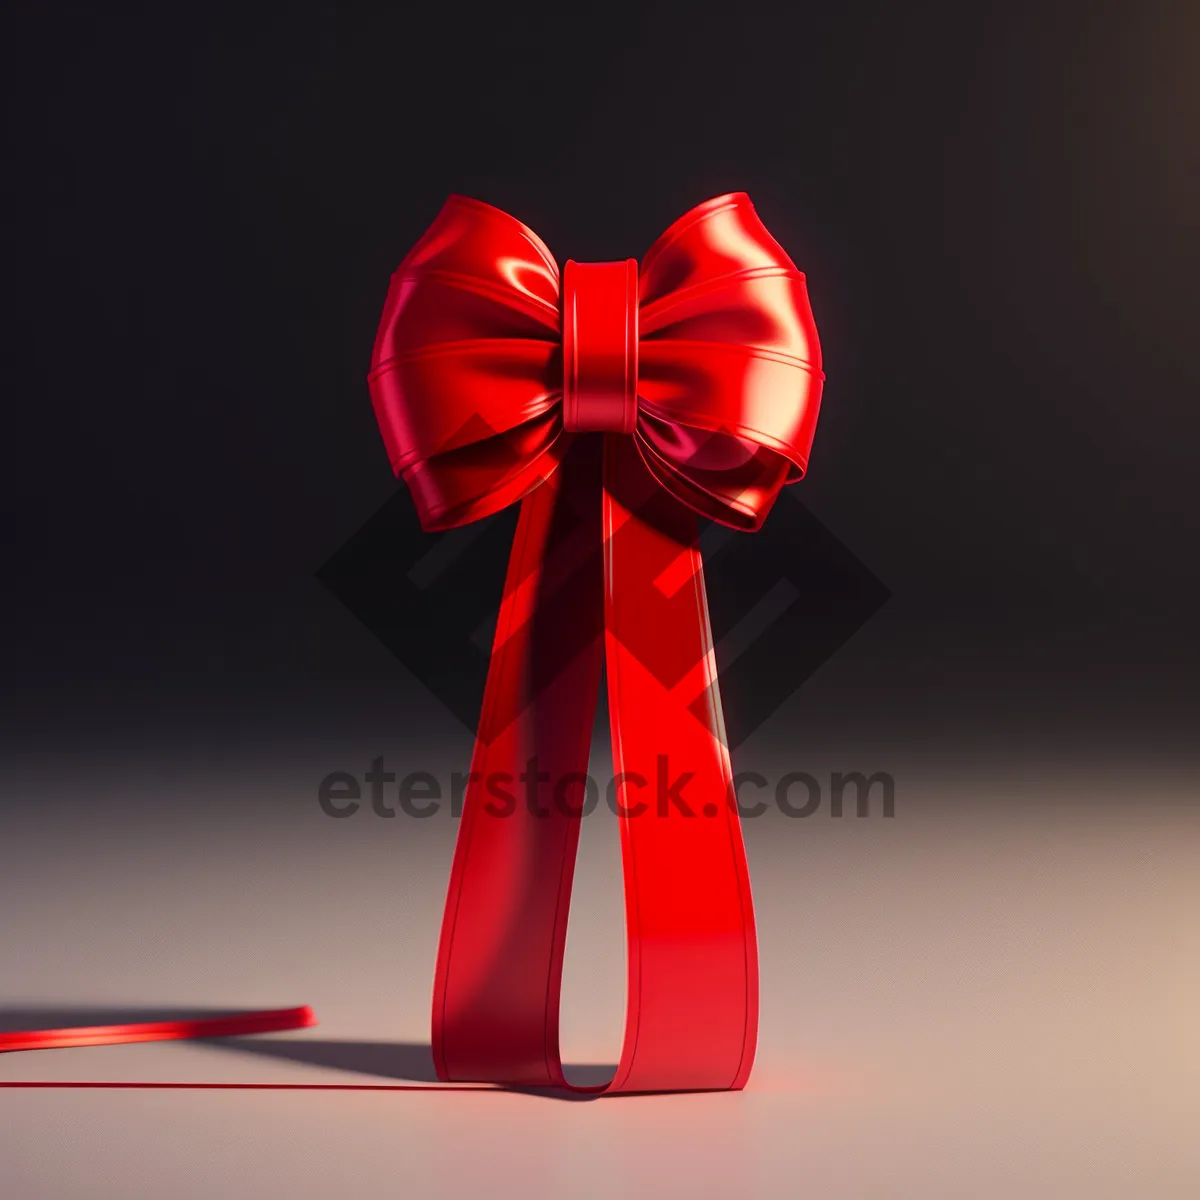 Picture of Silk ribbon gift bow icon - Valentine's Day celebration